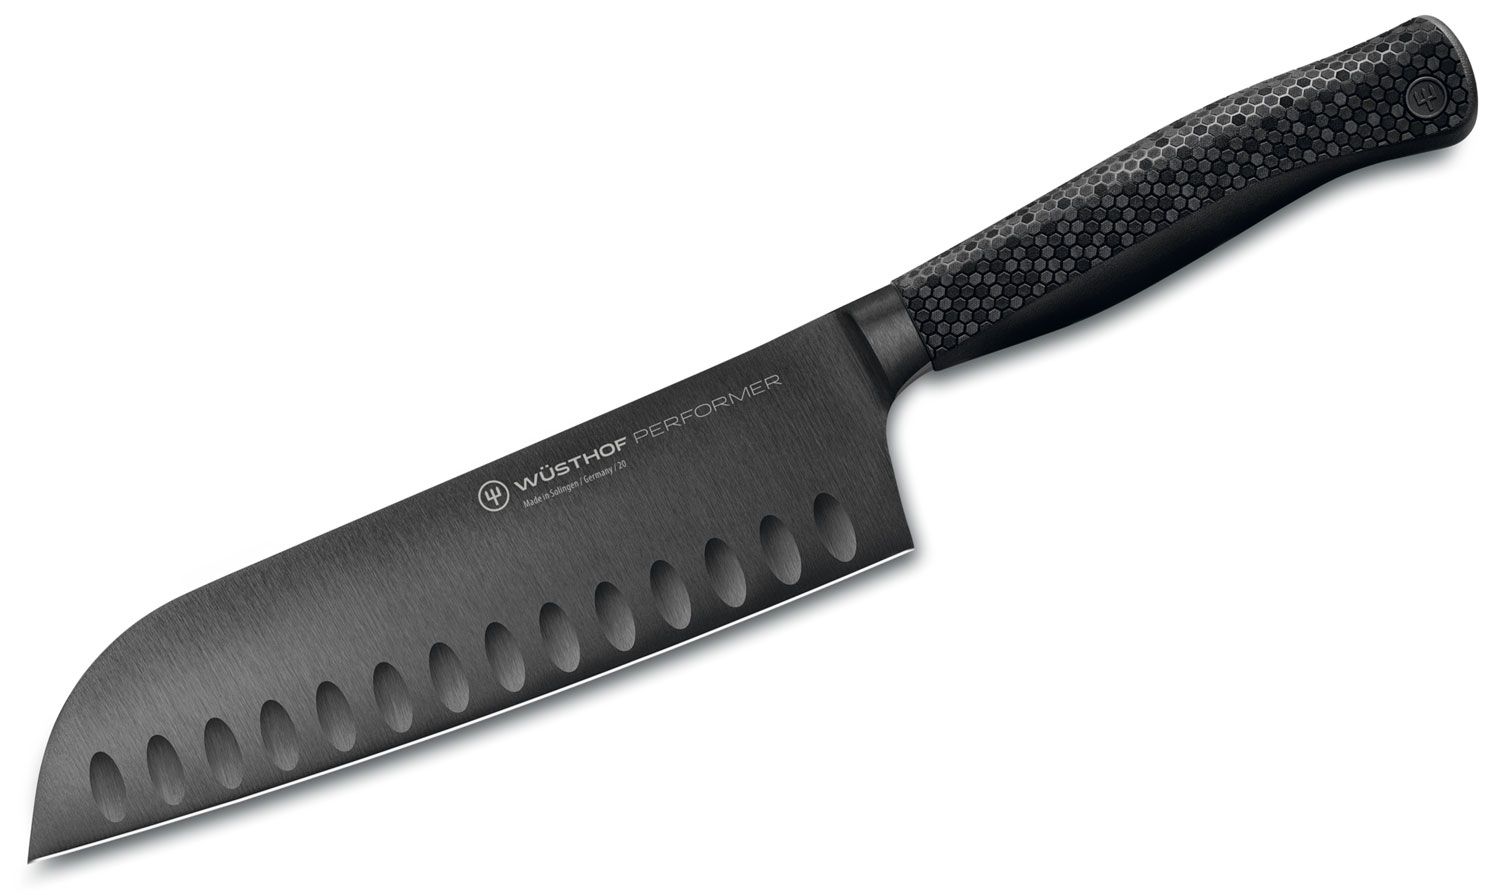 Wusthof Classic 14 Heavy, Wide Chef's Knife - KnifeCenter